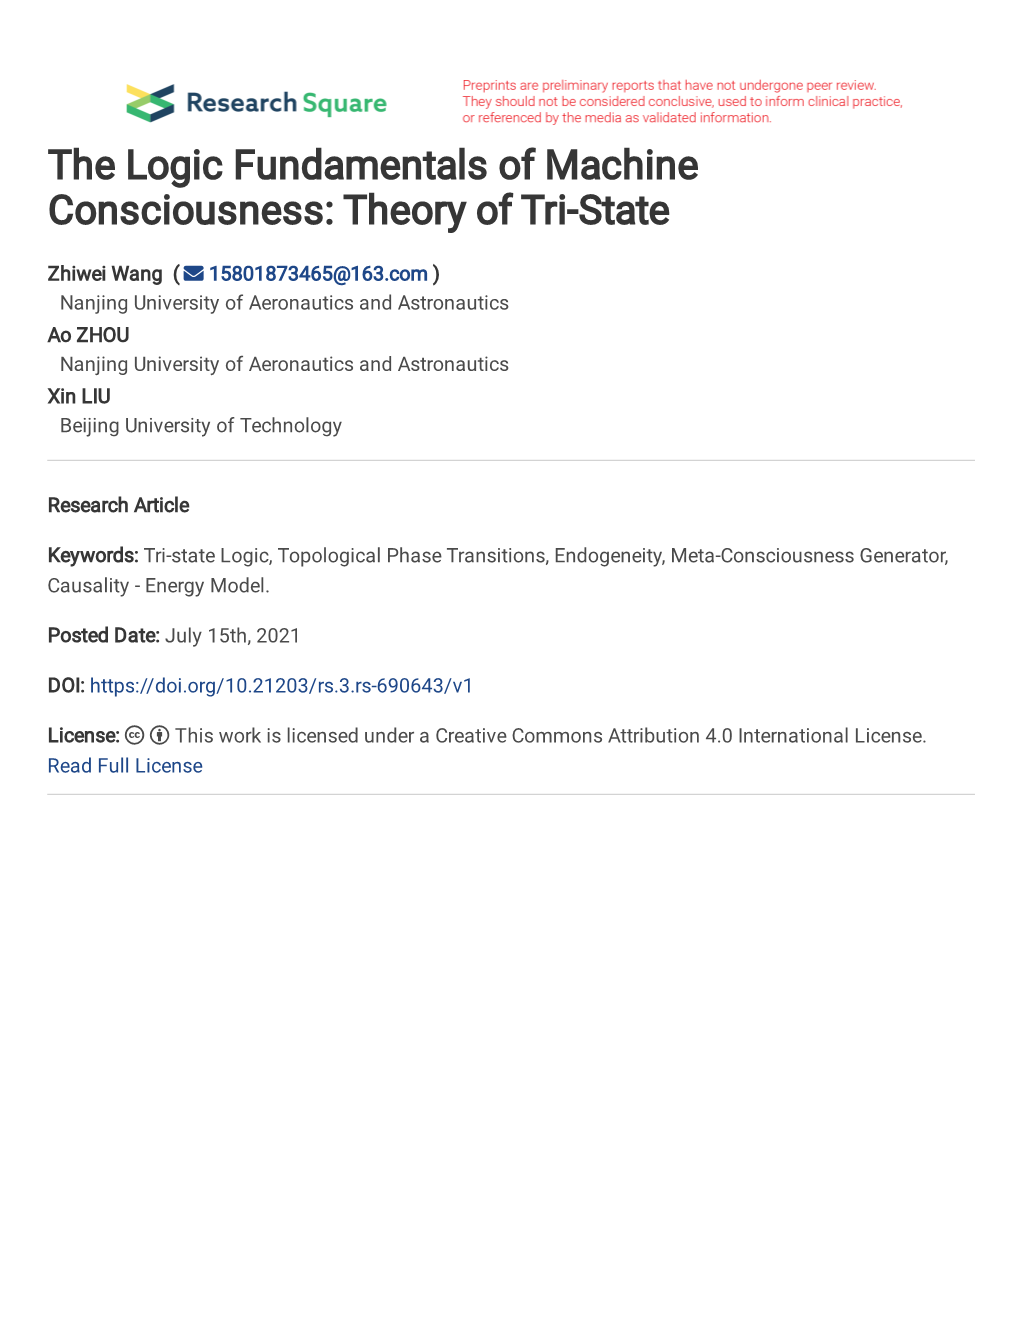 The Logic Fundamentals of Machine Consciousness: Theory of Tri-State